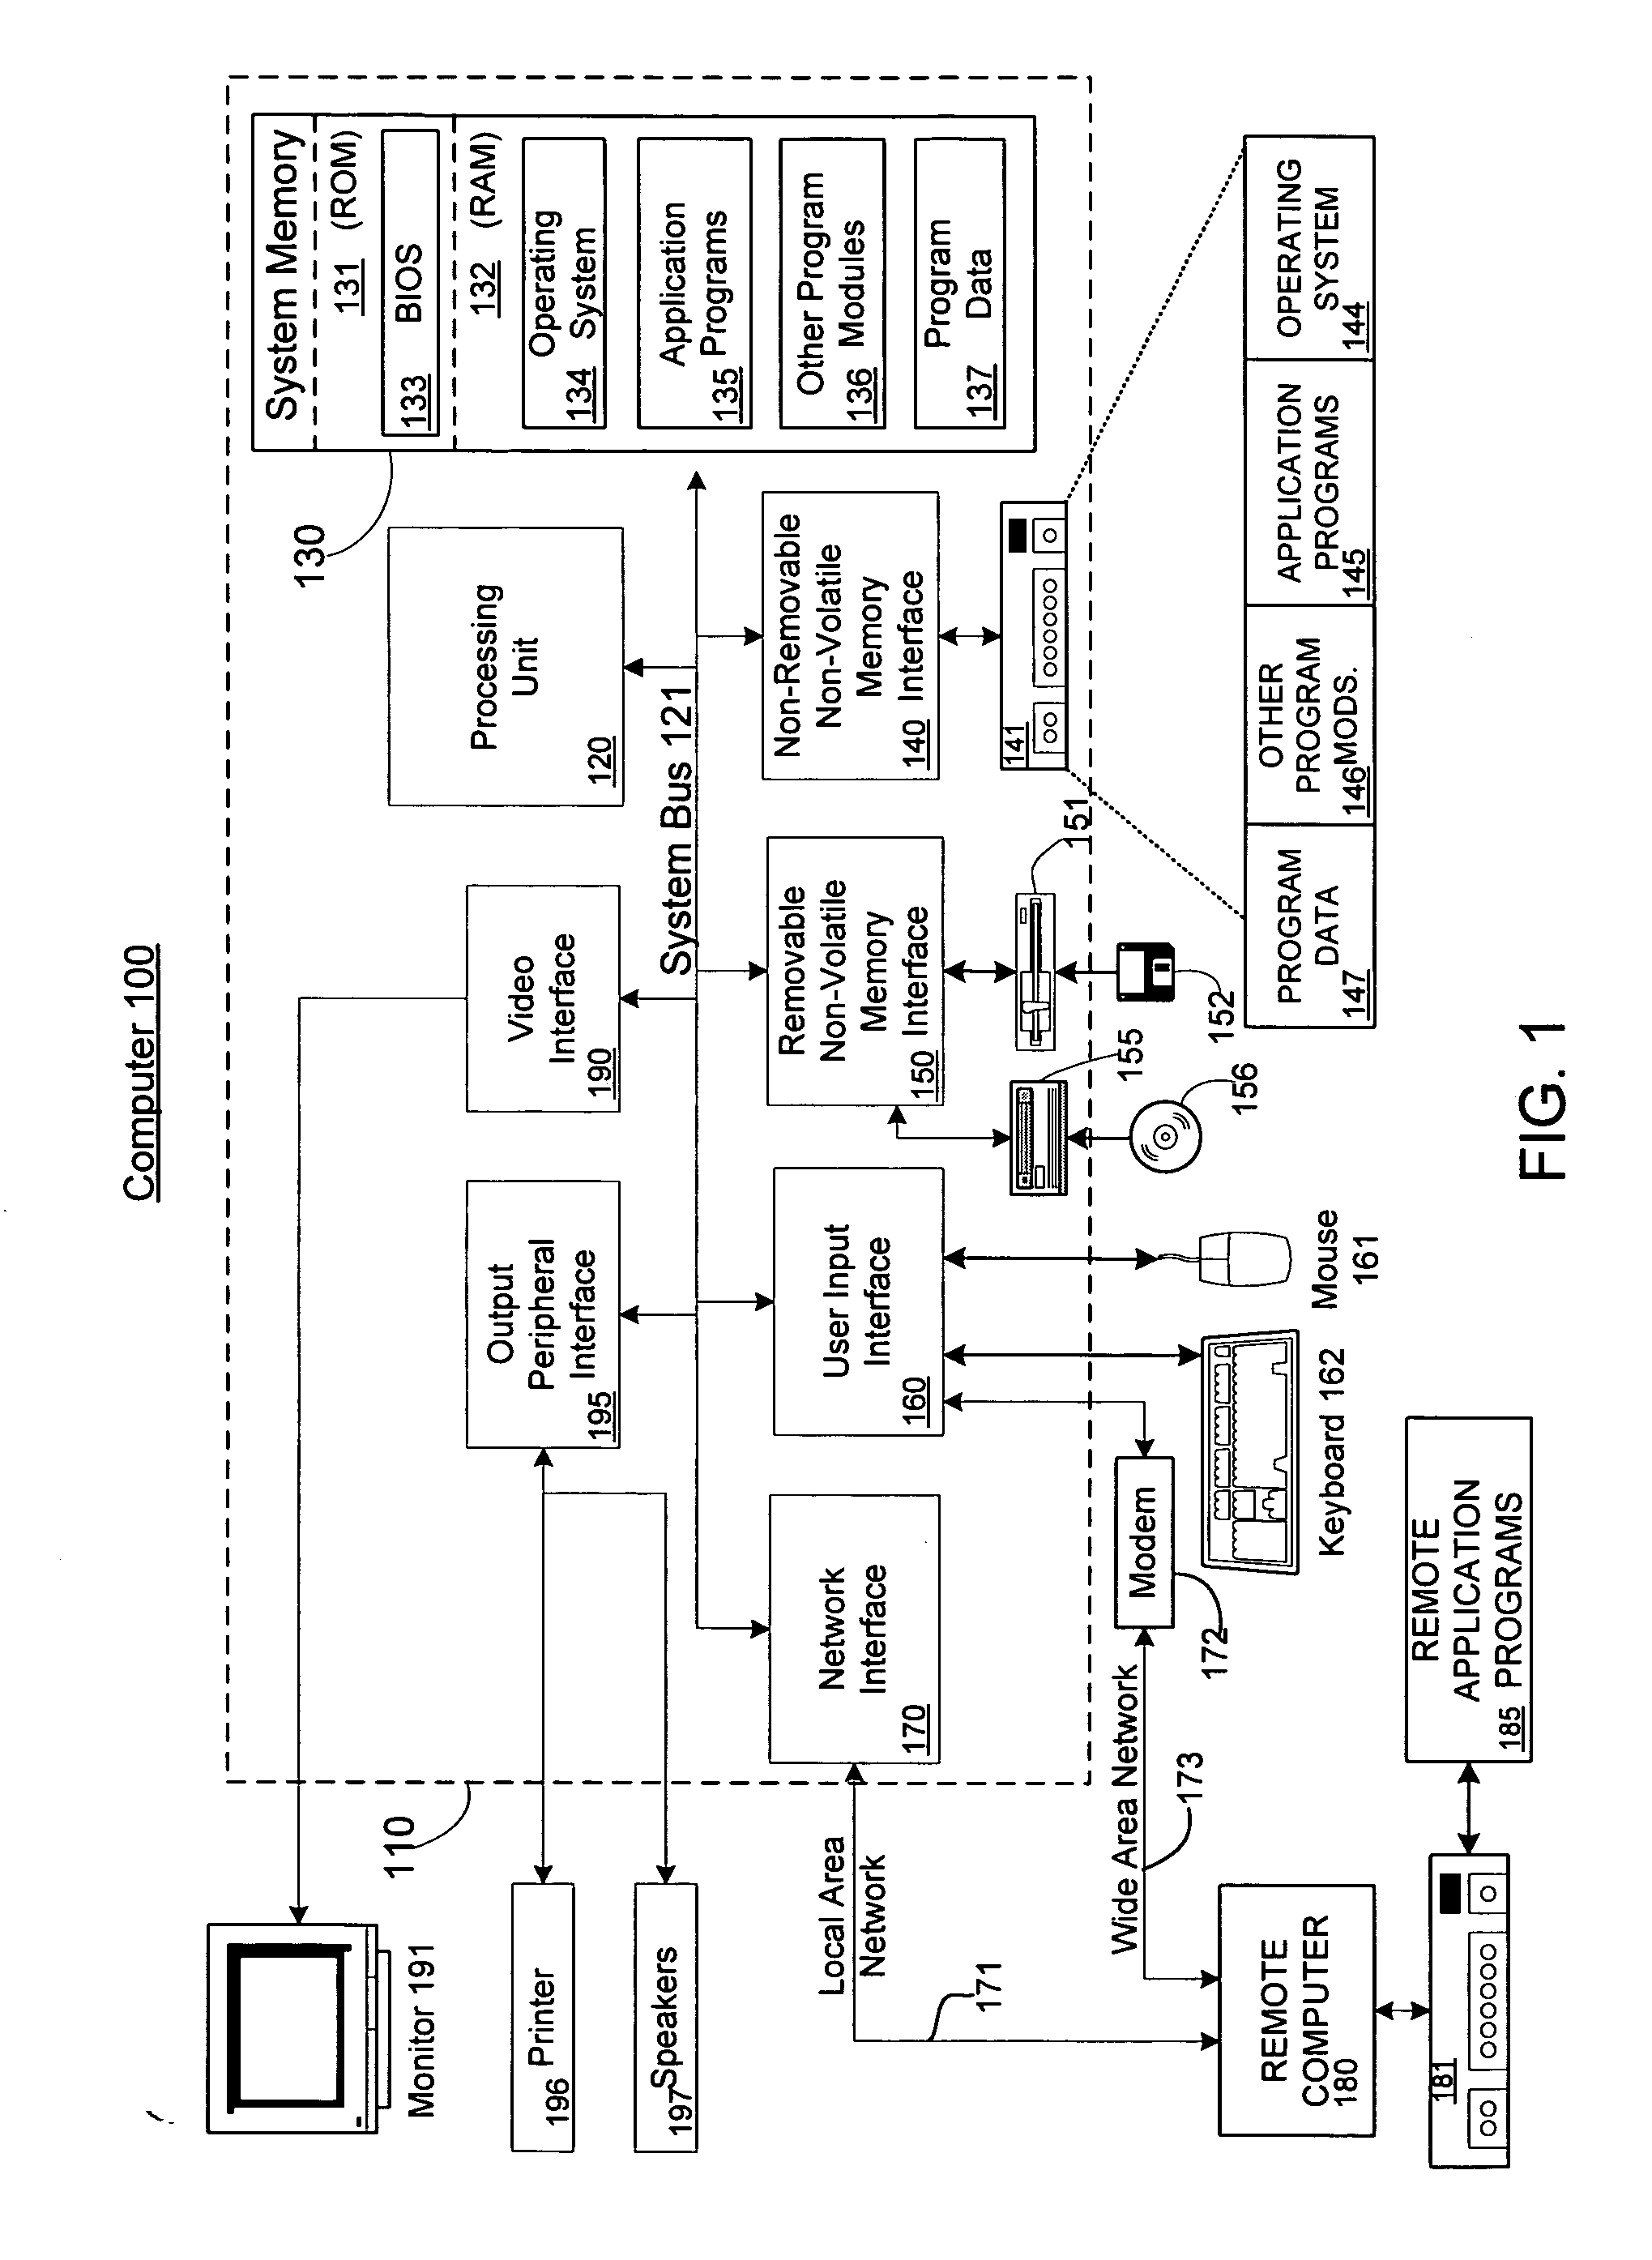 Systems and methods for providing distributed, decentralized data storage and retrieval